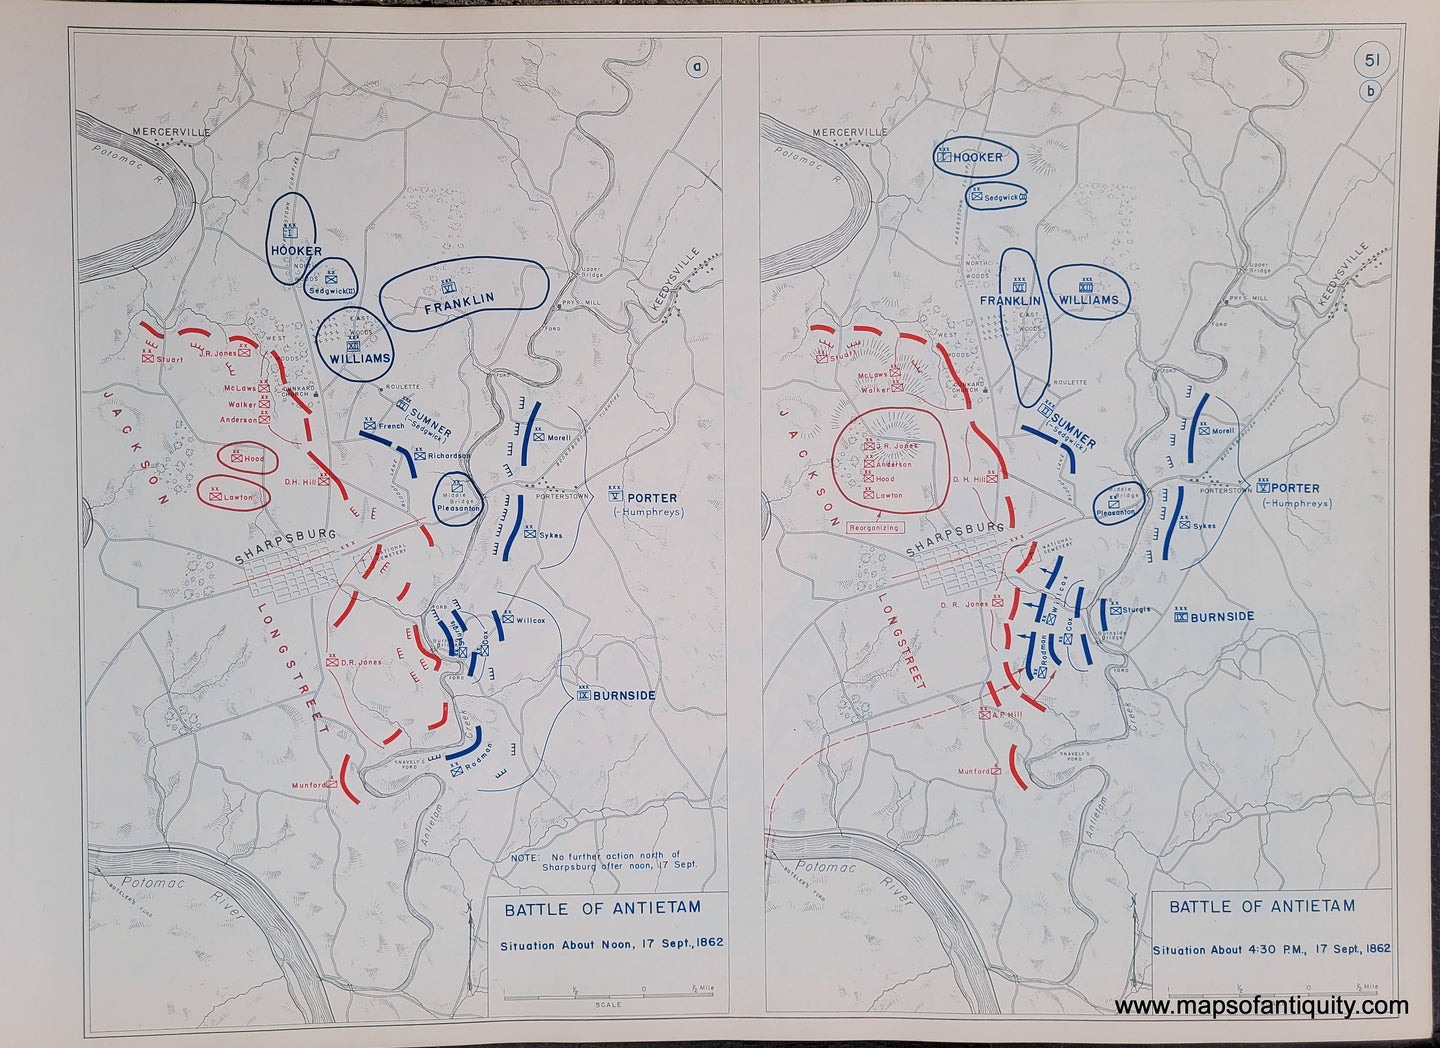 Genuine-Antique-Map-Battle-of-Antietam-Situation-About-Noon-17-Sept--1862-and-Situation-About-4-30-PM-17-Sept--1862-1948-Matthew-Forney-Steele-Dept-of-Military-Art-and-Engineering-US-Military-Academy-West-Point-Maps-Of-Antiquity